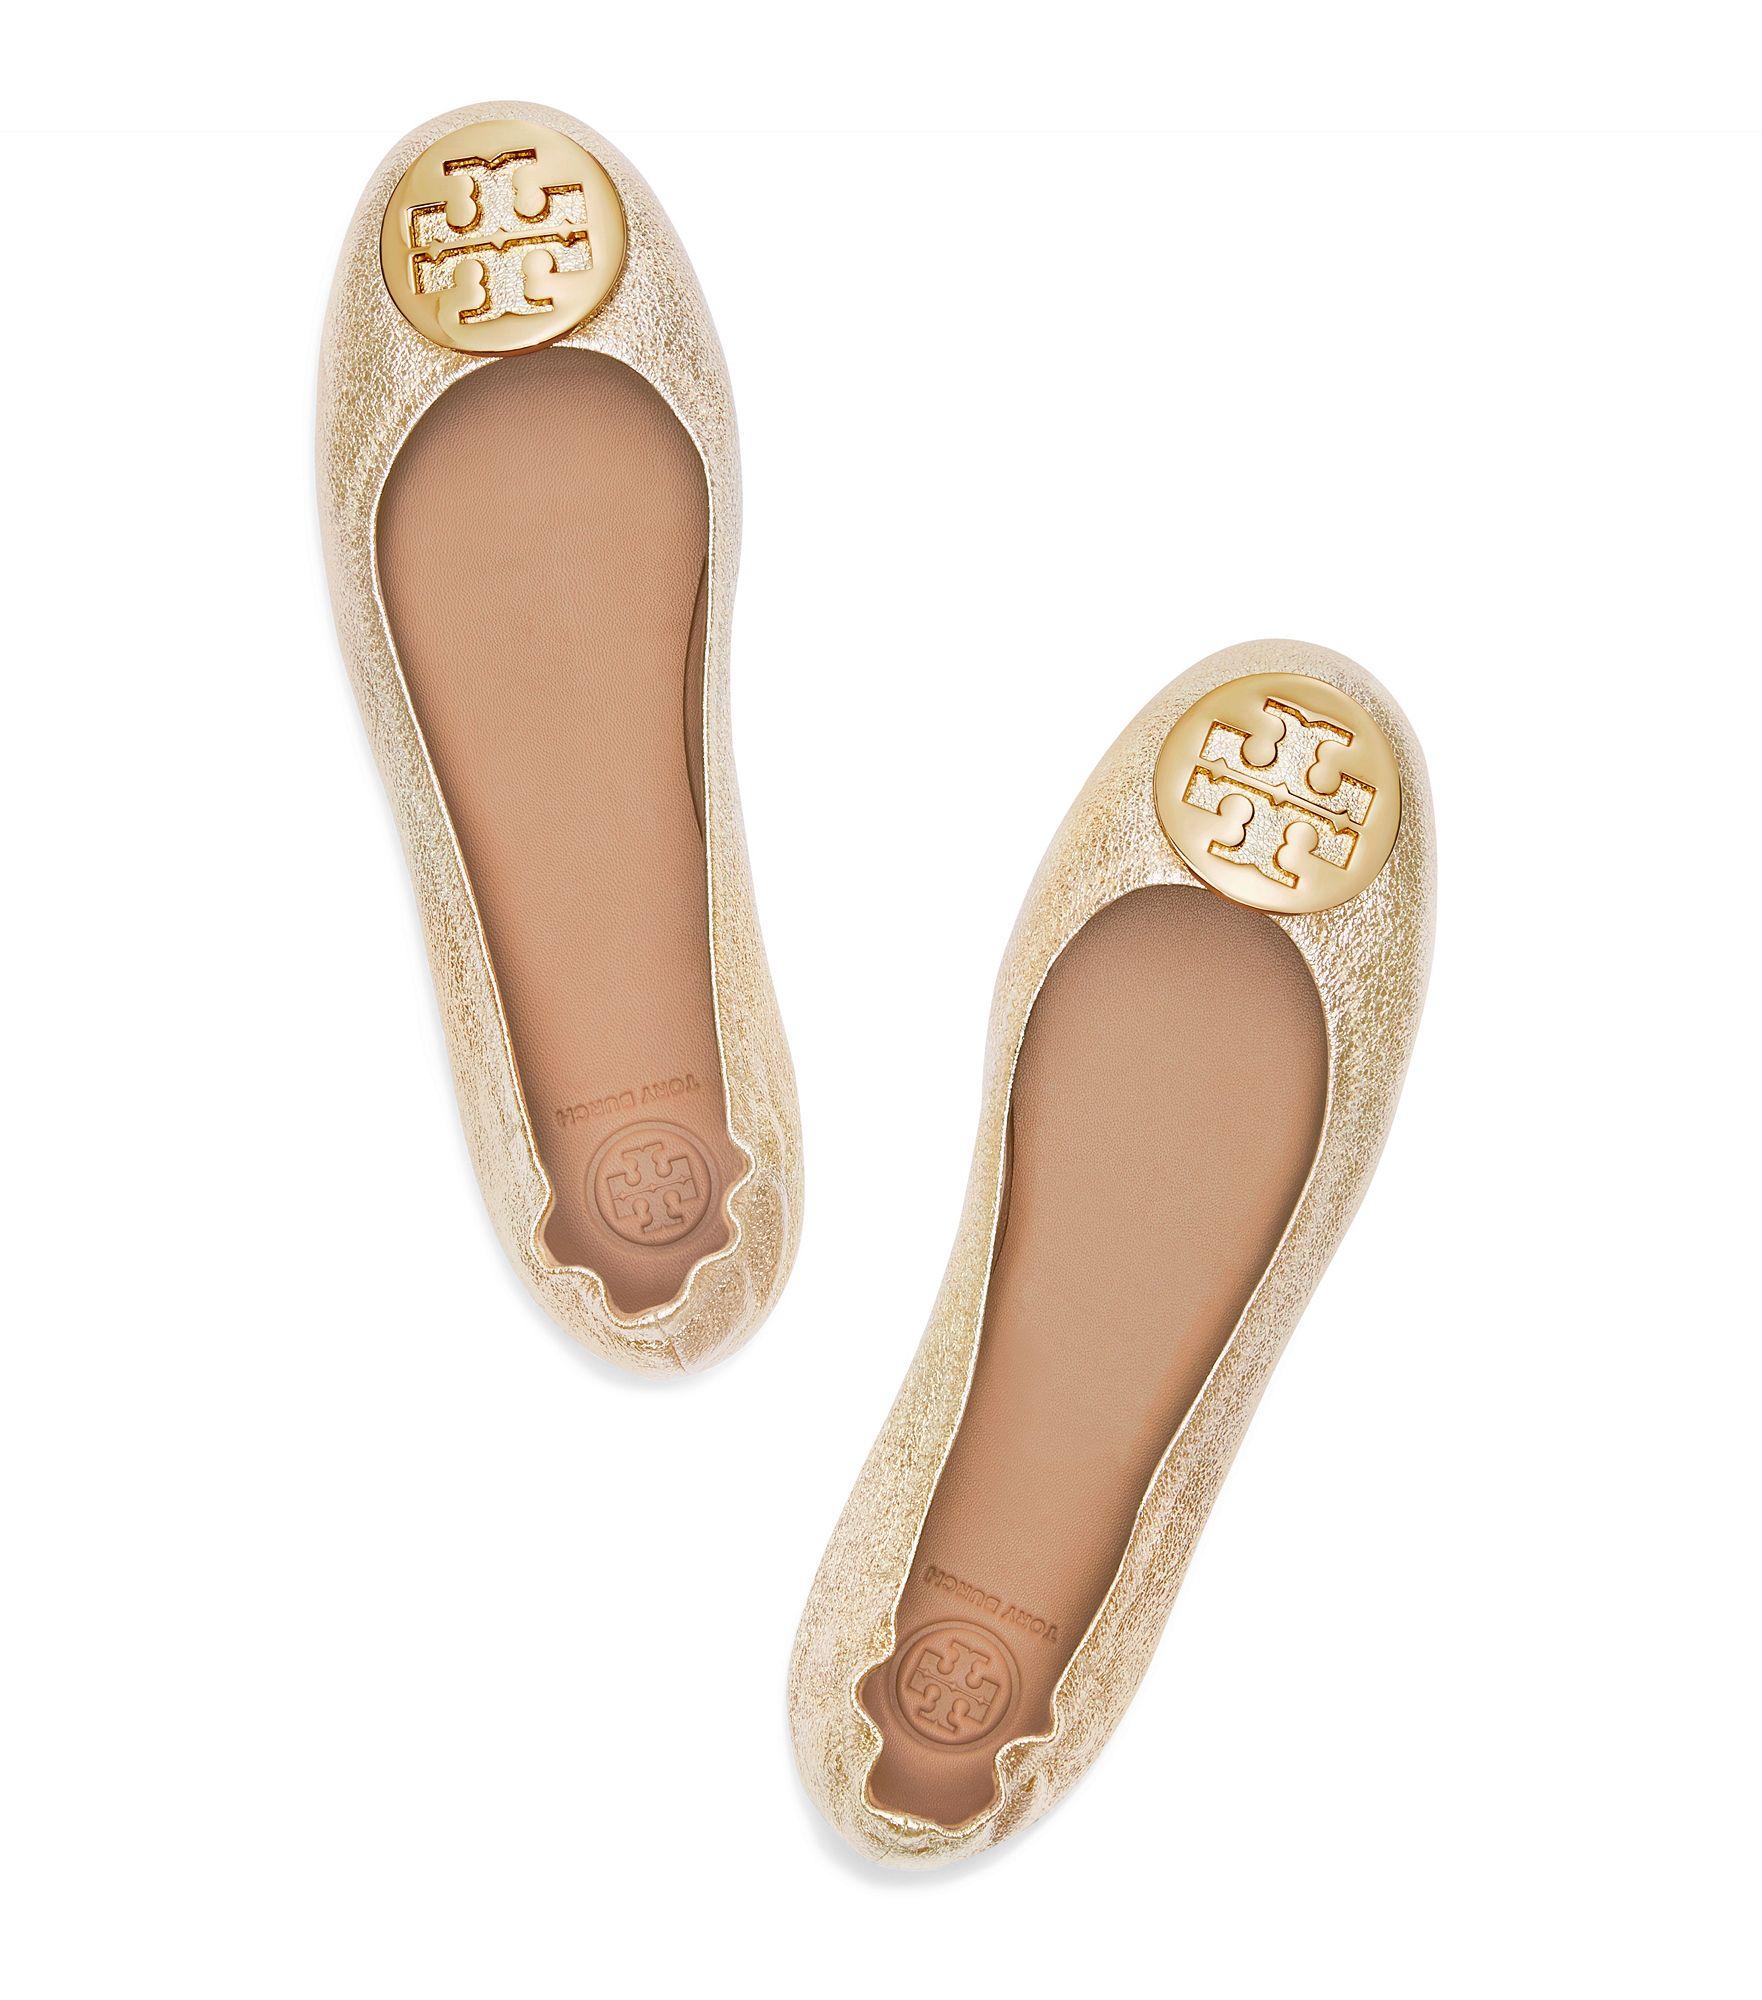 Tory Burch Gold Ballet Flats on Sale, SAVE 58% 